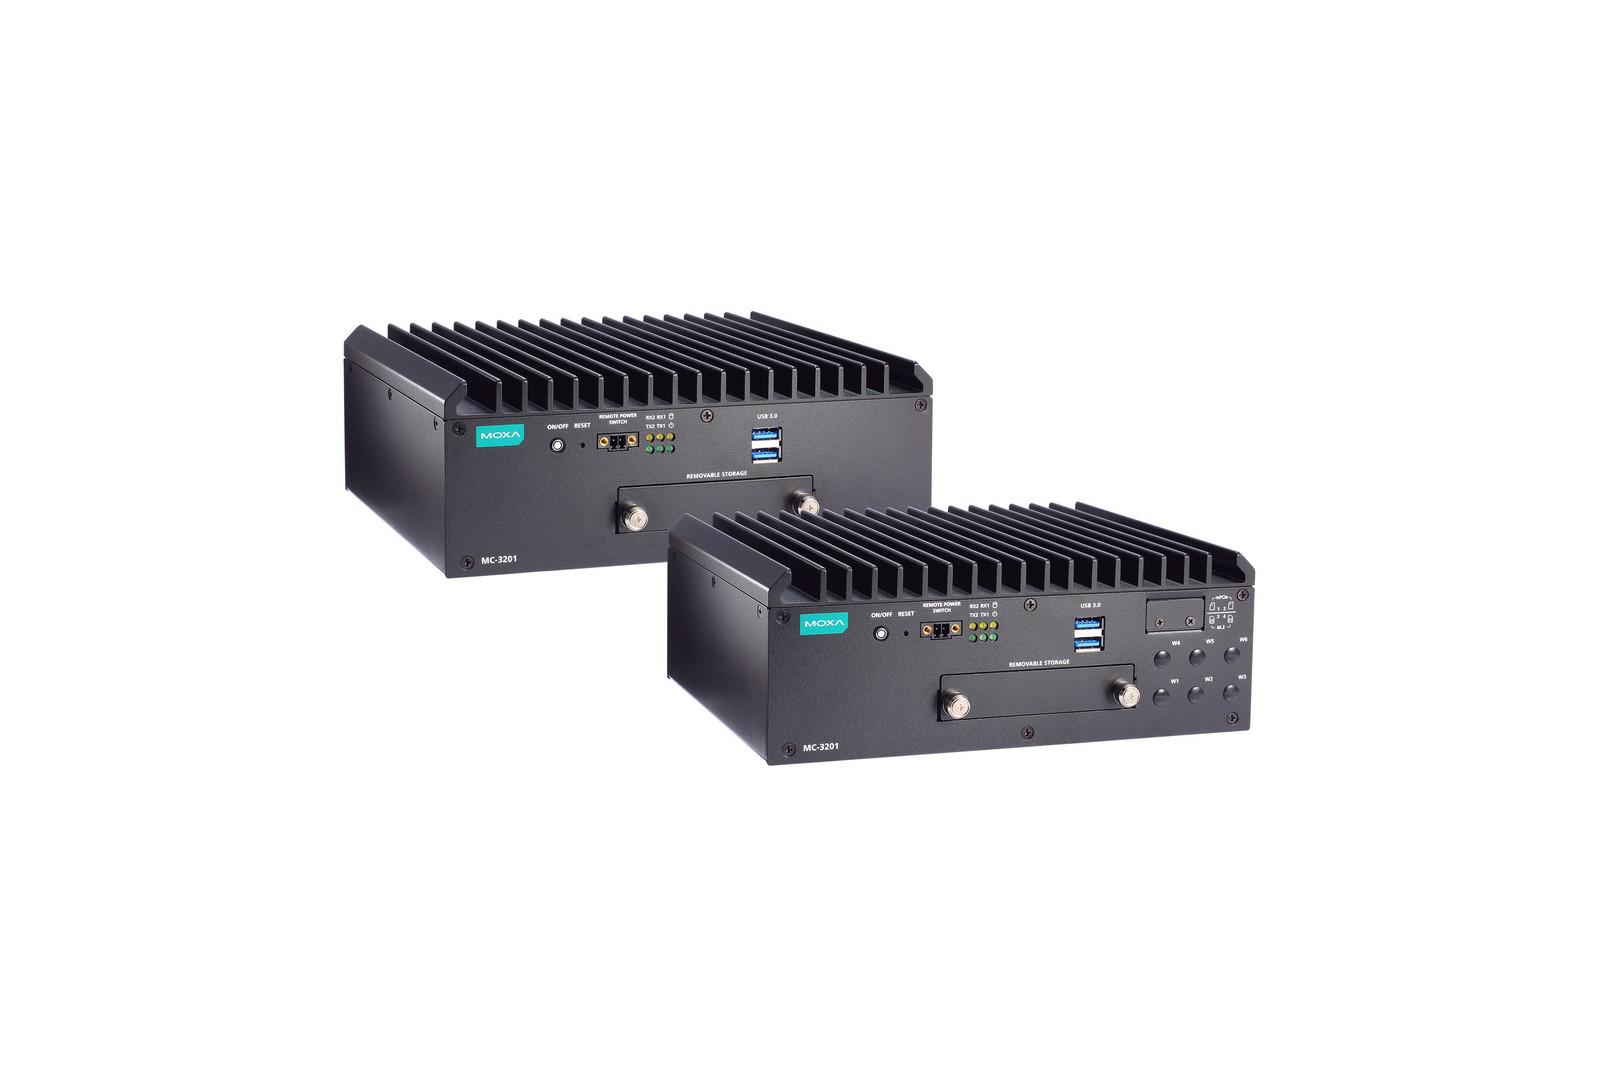 MC-3201 Series Compact computers with 11th Gen Intel® Core™ processor, designed for IIoT, AI, and marine applications, -20 to 55°C operating temperature